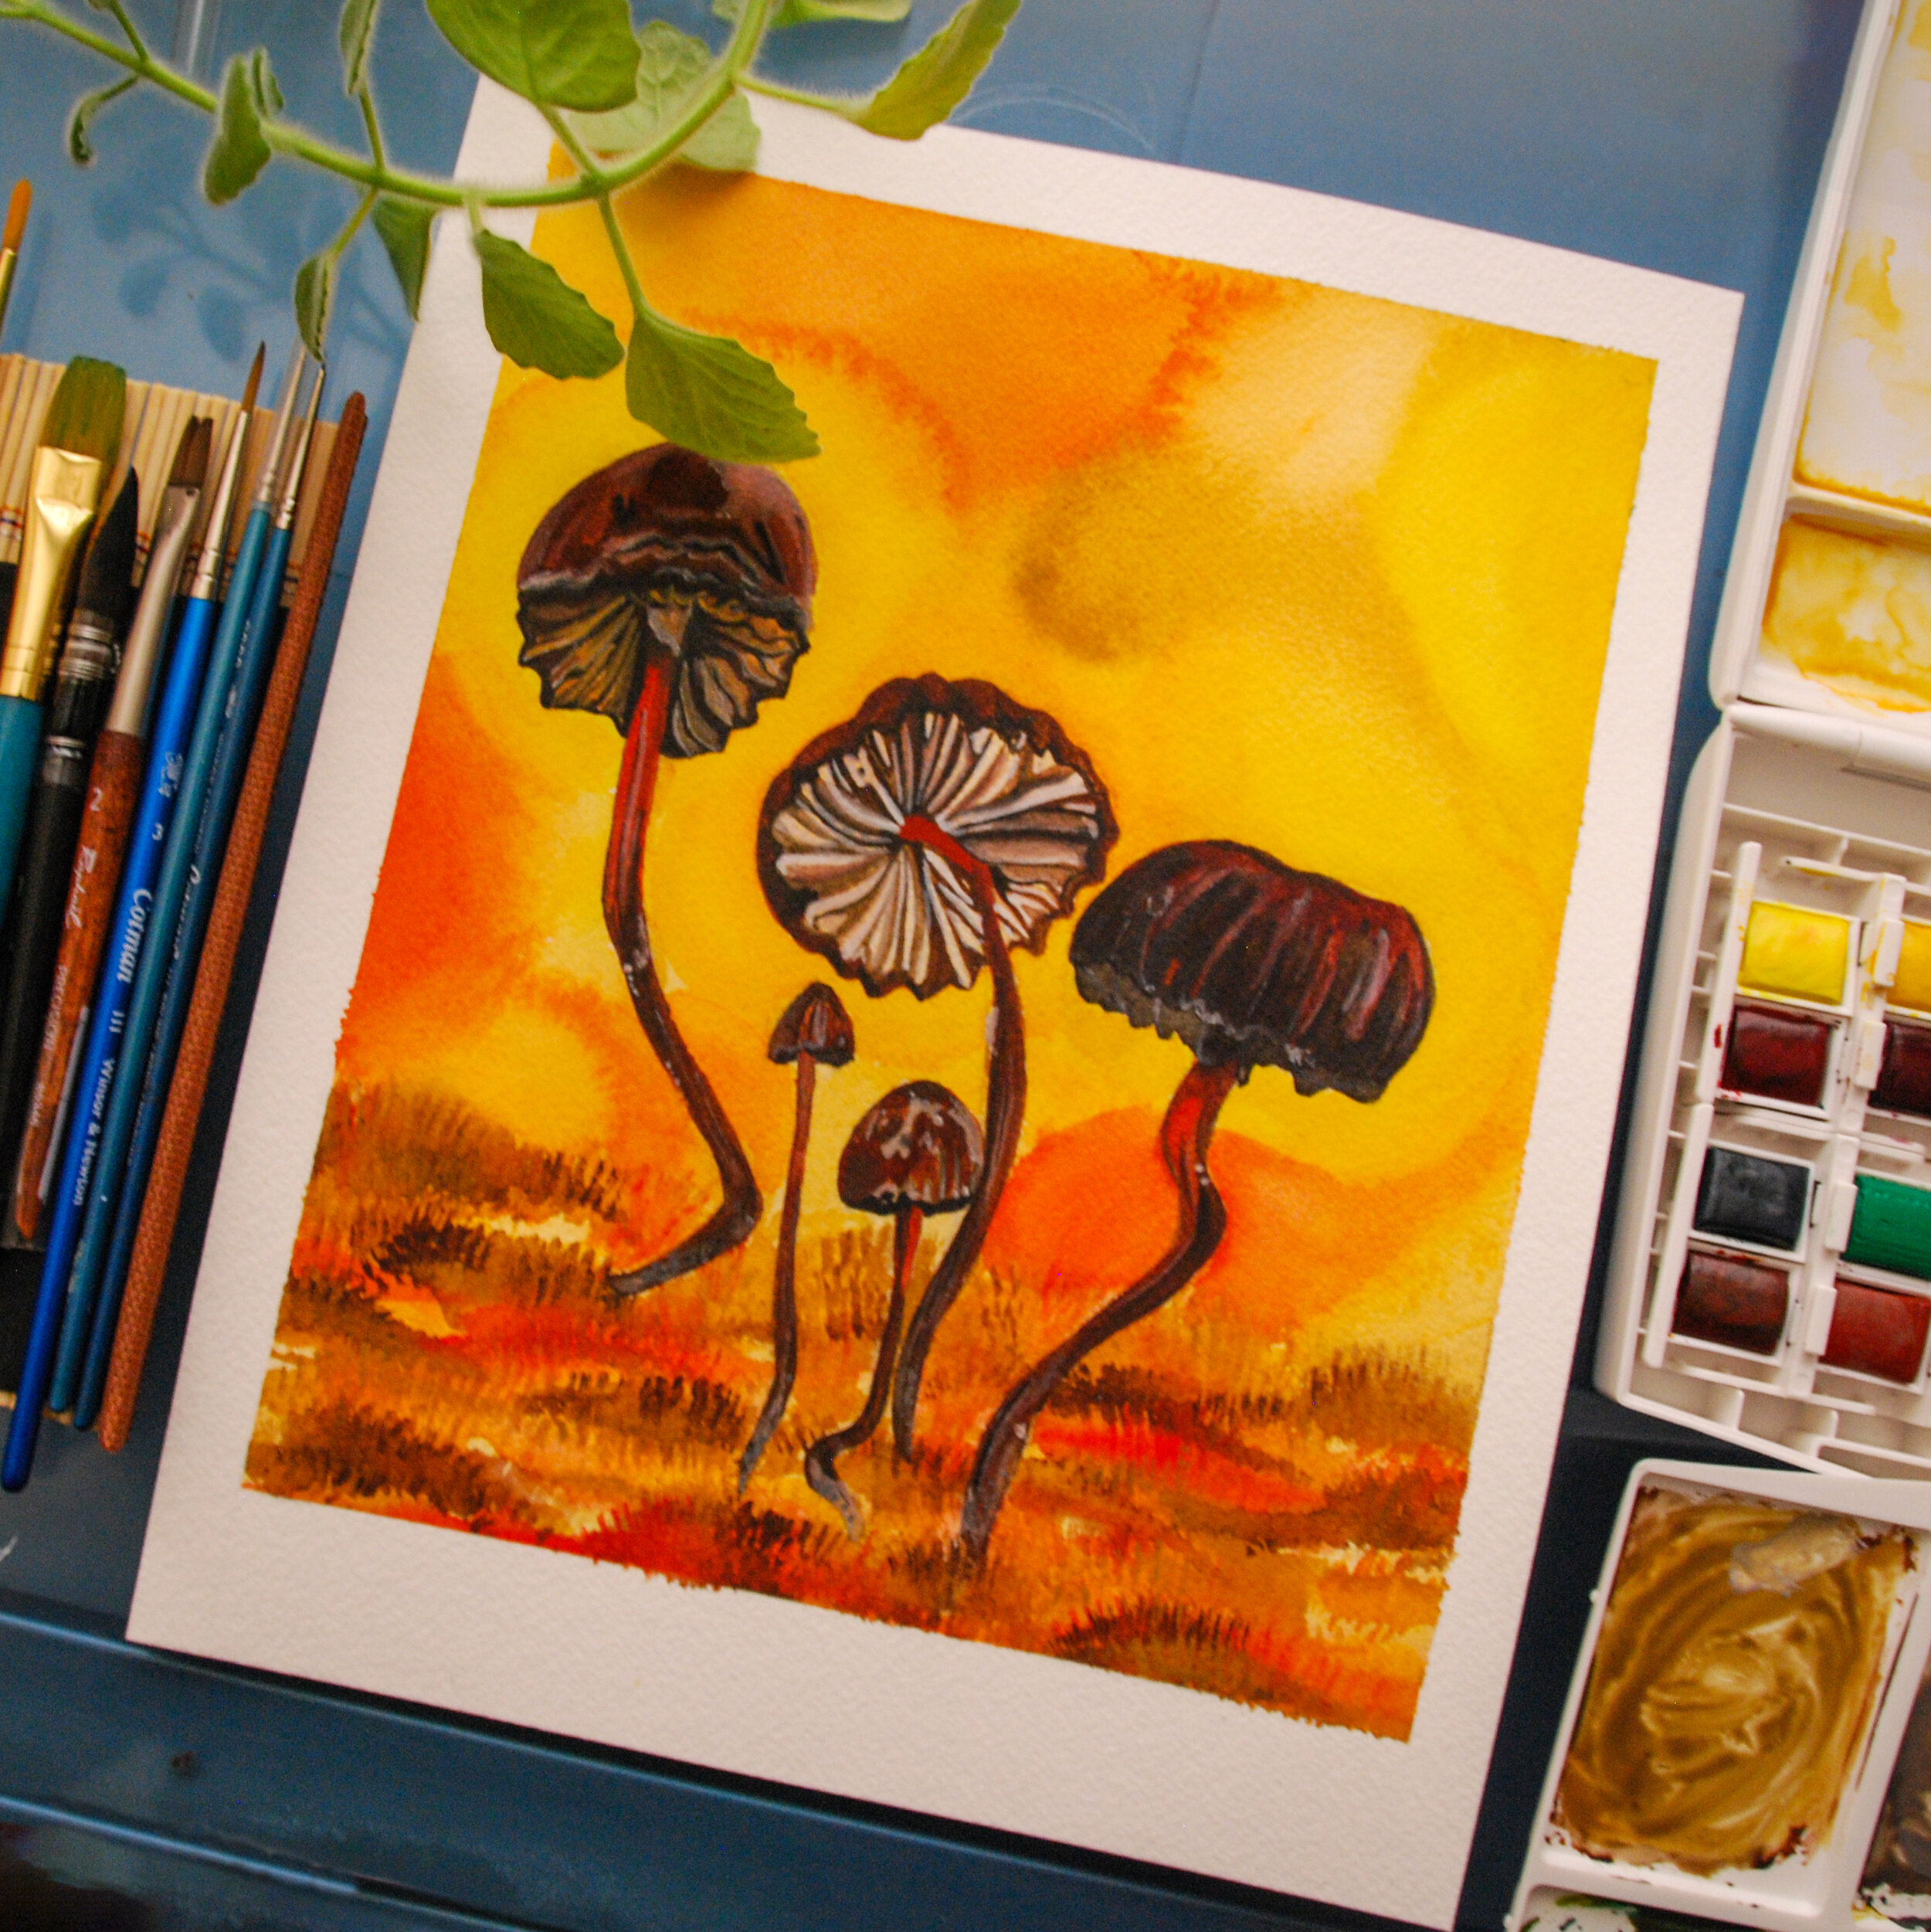 Verna, Jacquelene Cristina_Too small to eat, but lovely to behold_Marasmius Plicatus_Watercolor on cotton paper_2020.jpg